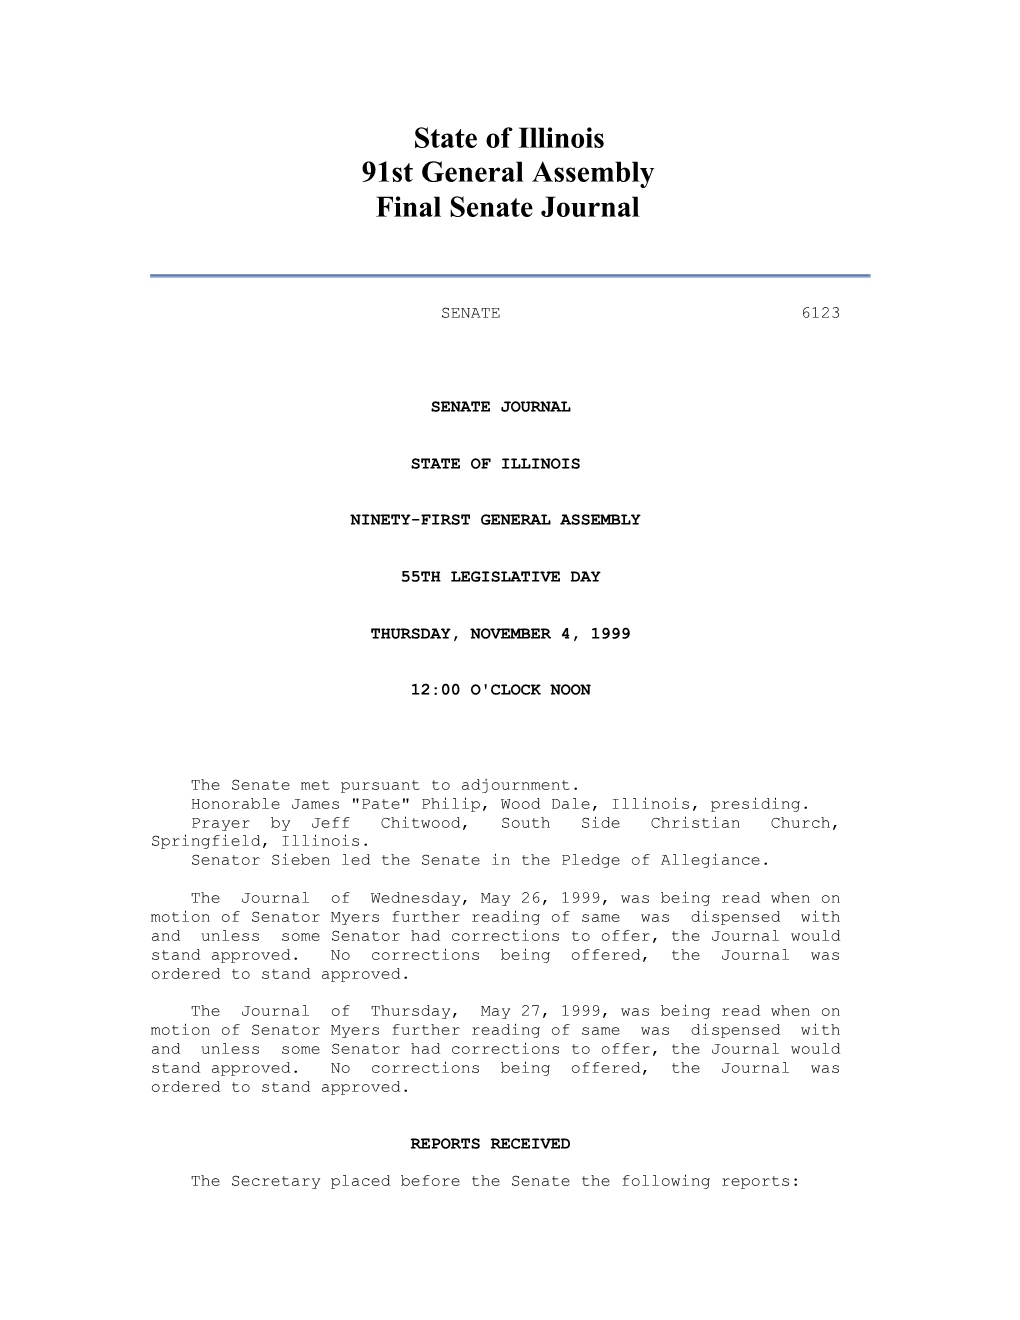 State of Illinois 91St General Assembly Final Senate Journal